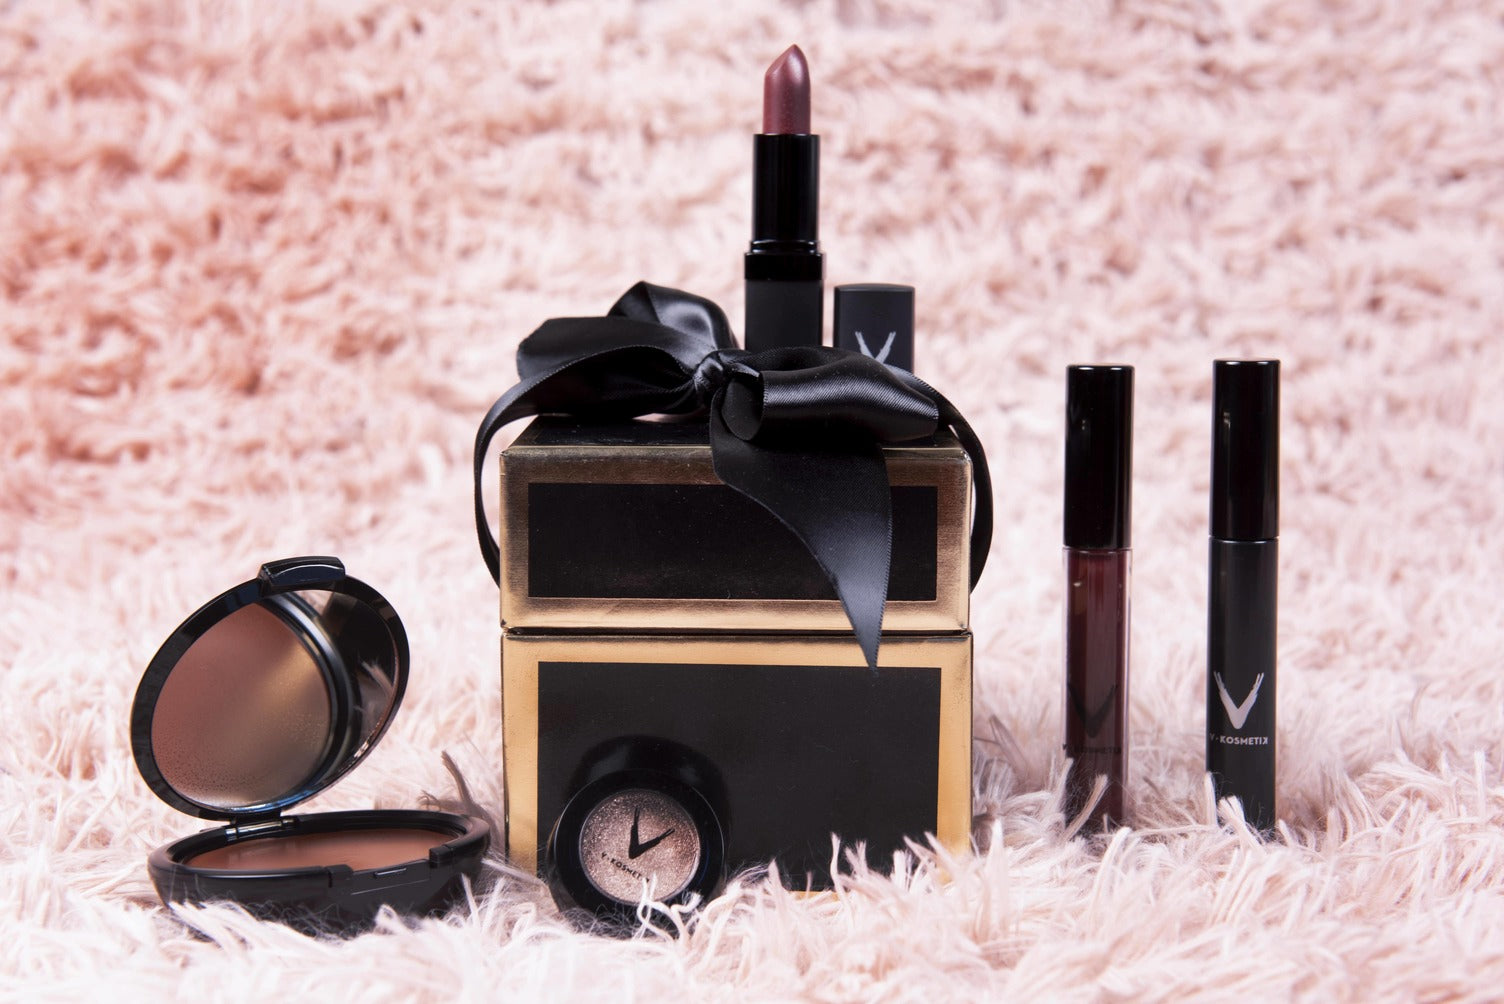 5 Makeup Products That Make a Great Holiday Gift